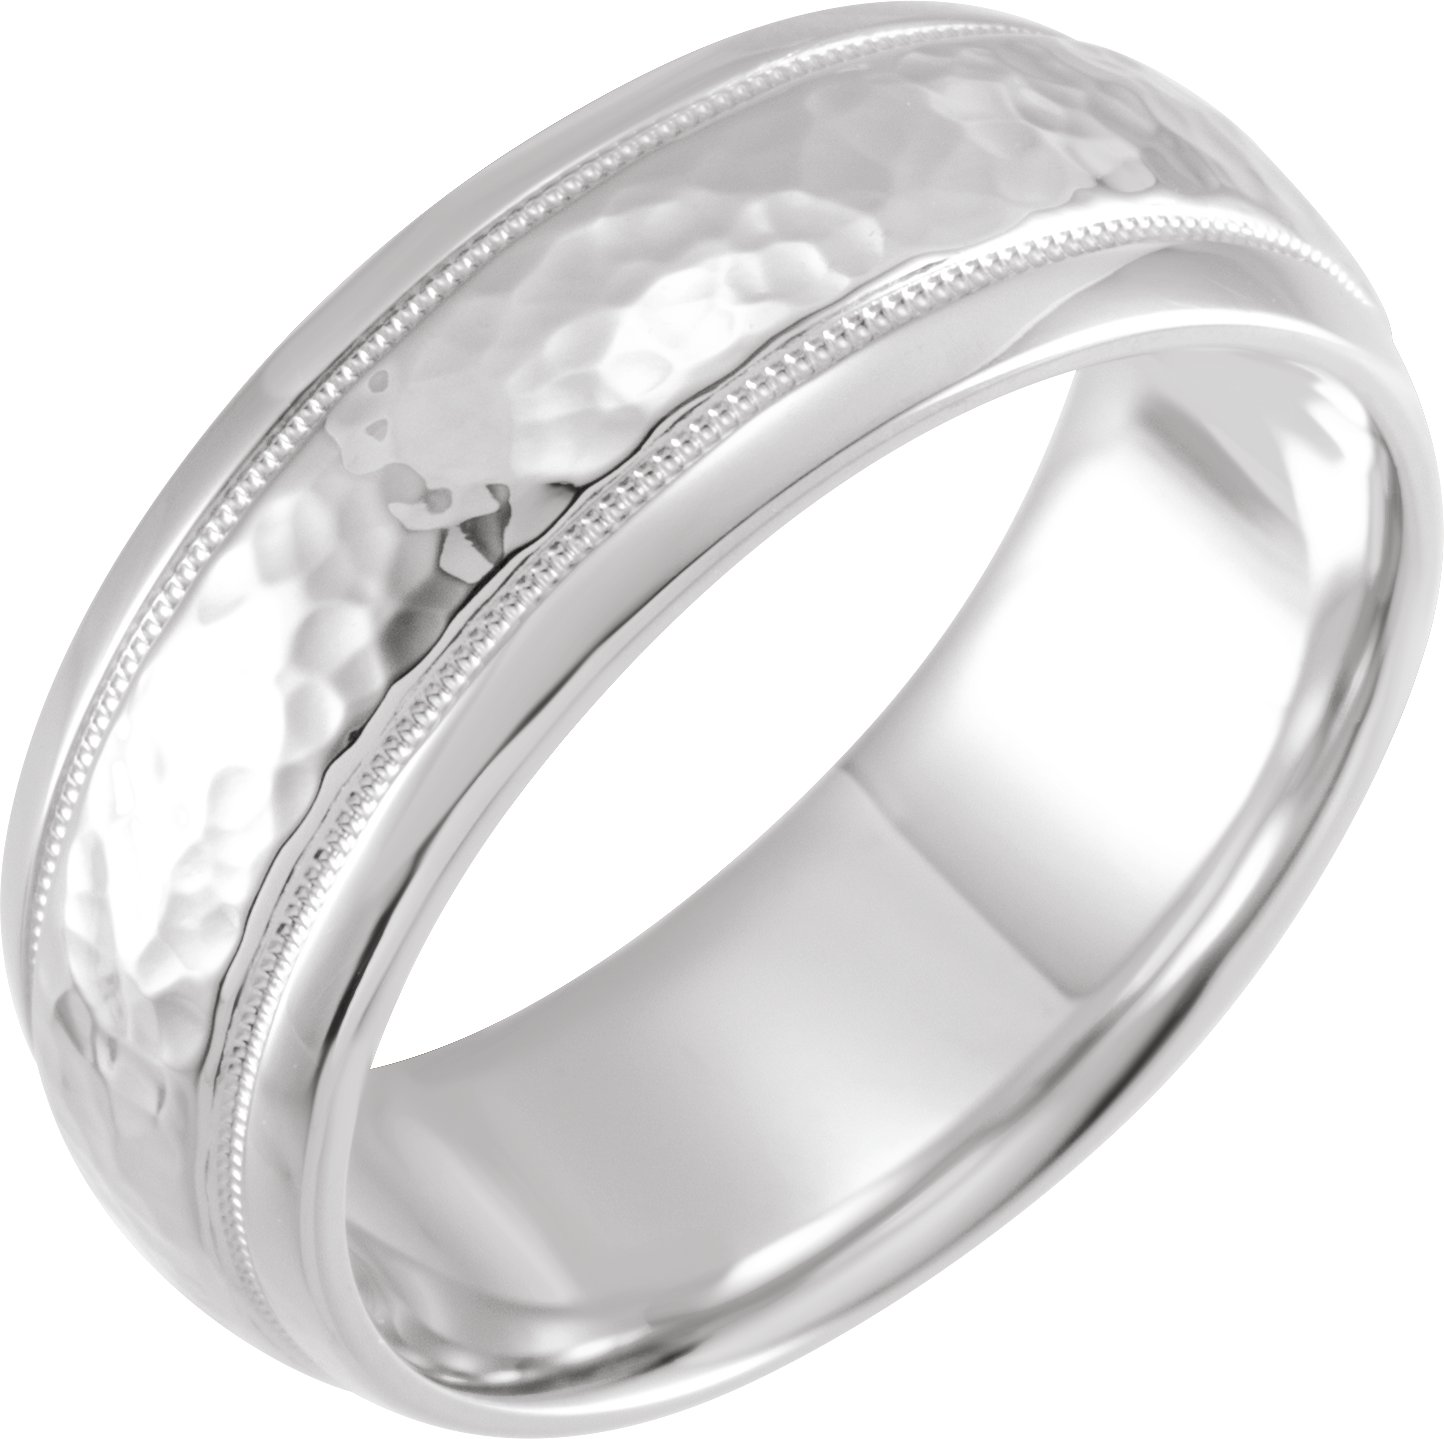 Sterling Silver 8 mm Half Round Band with Hammer Finish and Milgrain Size 18 Ref 16259257